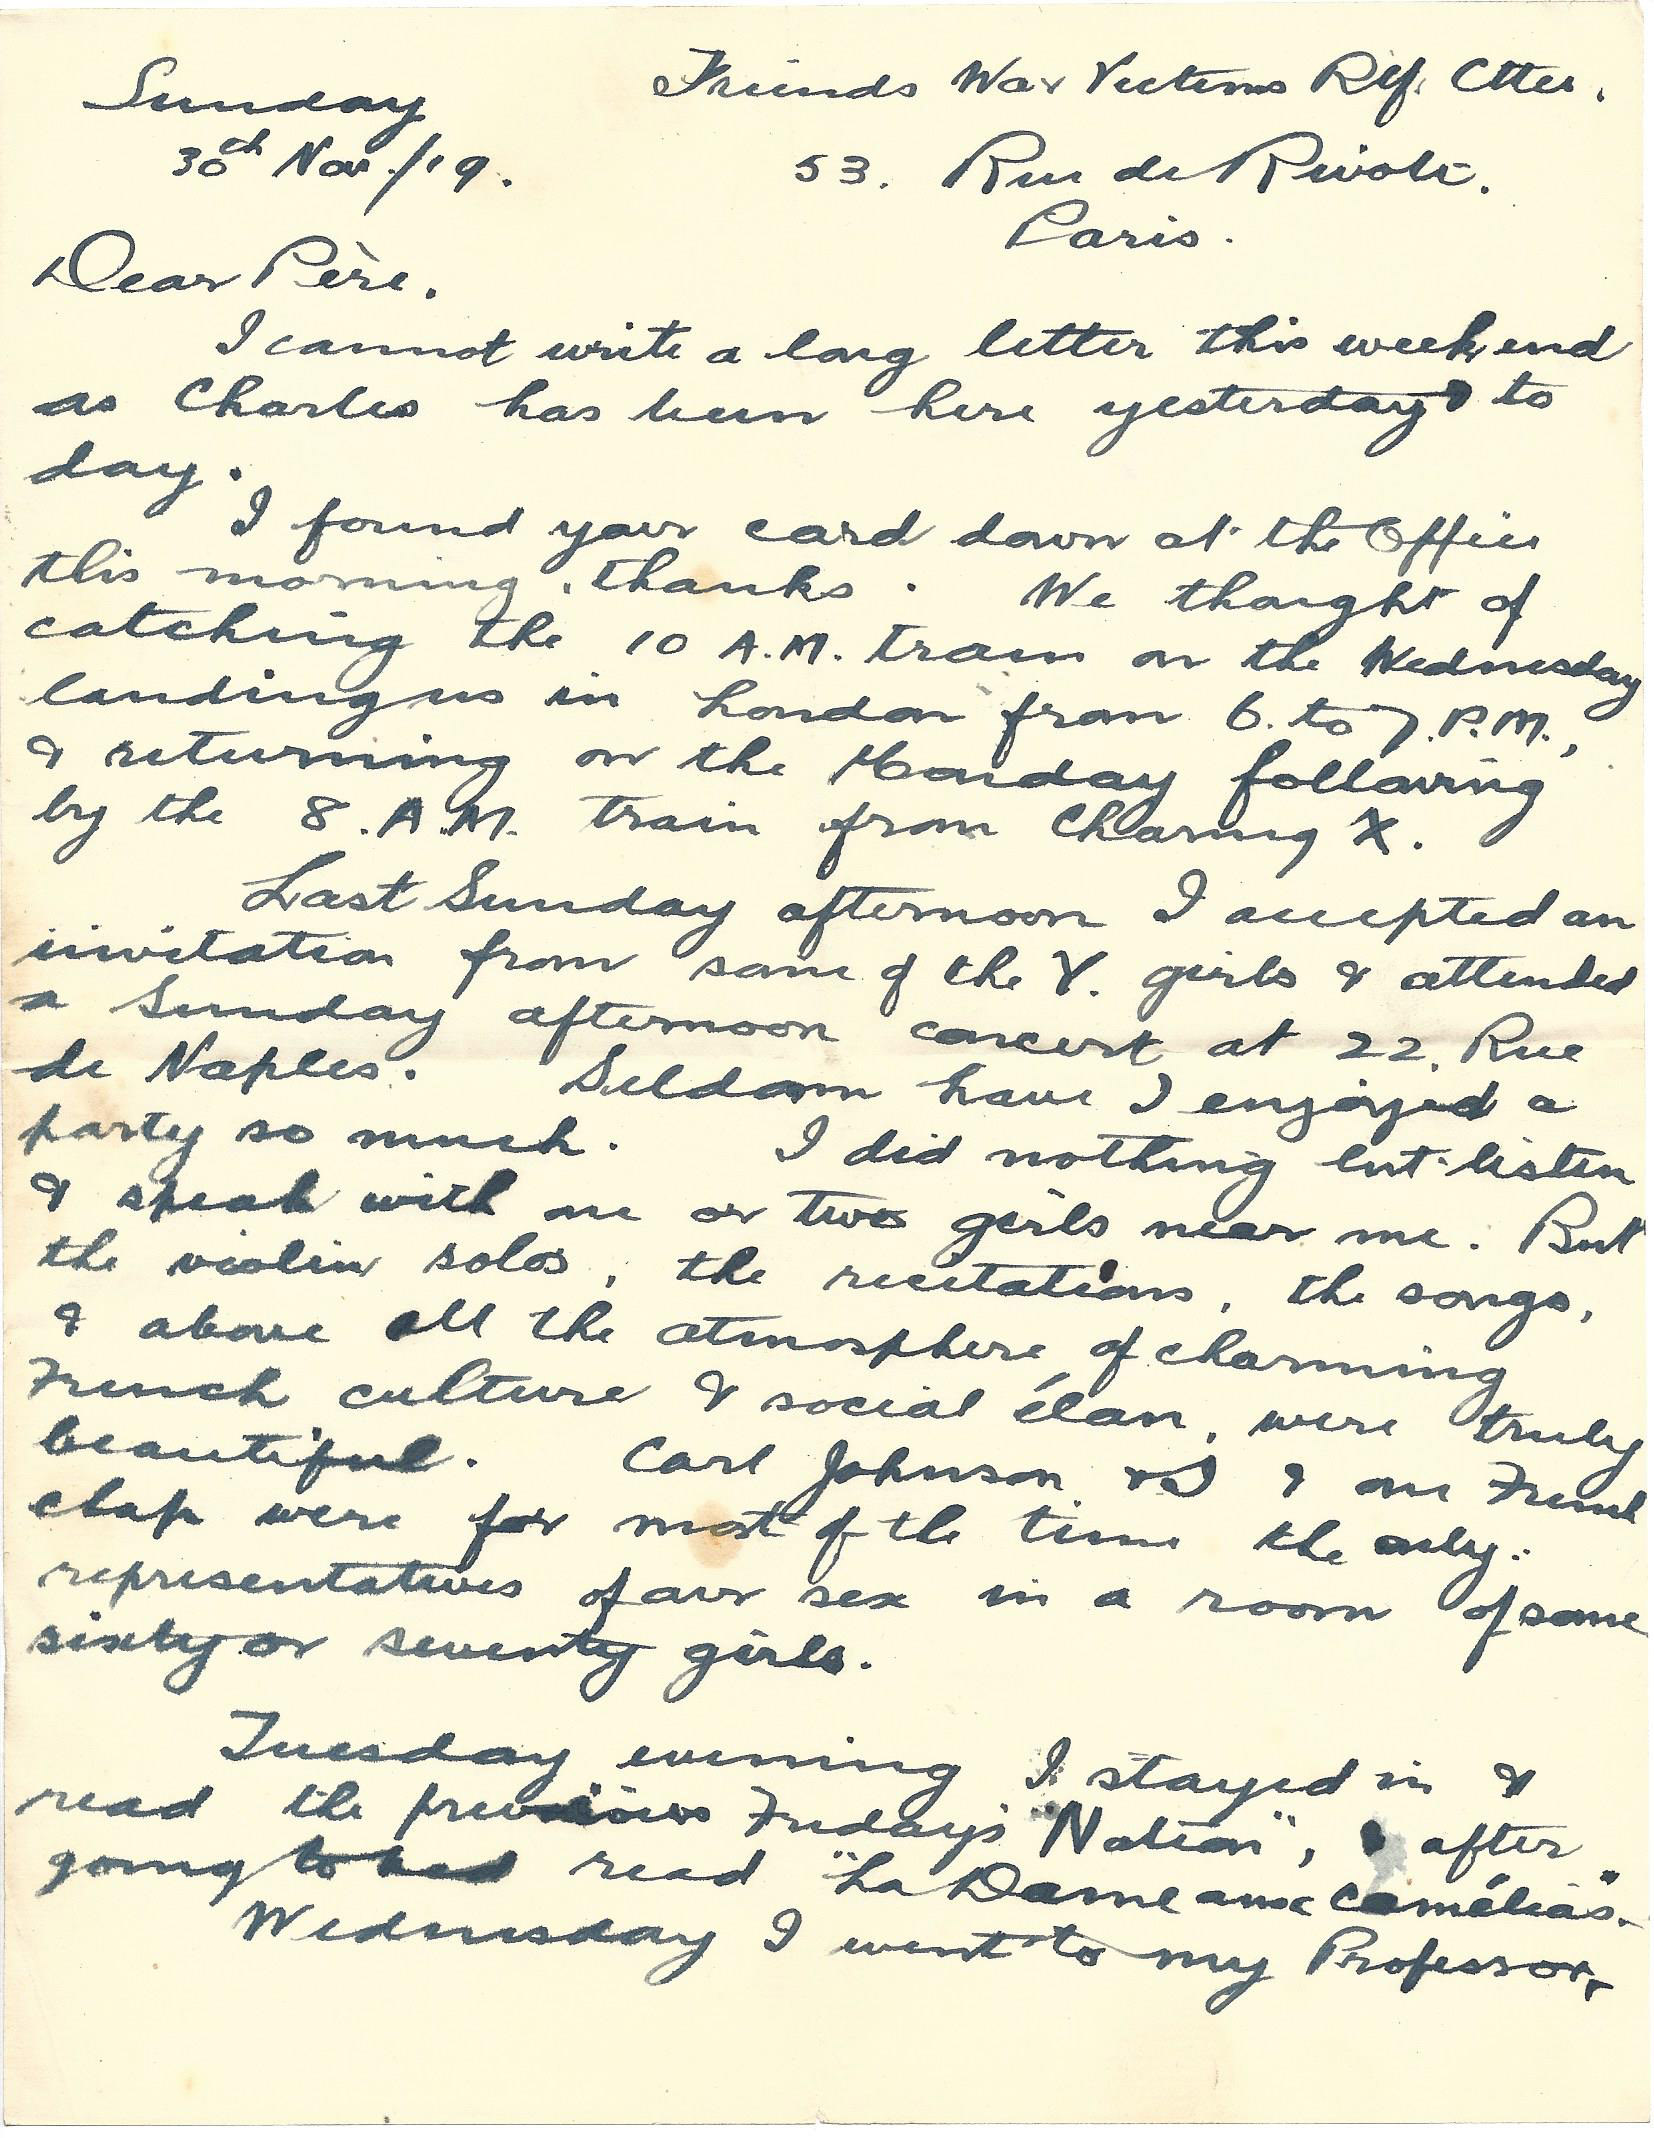 1919-11-30 Page 1 letter by Donald Bearman